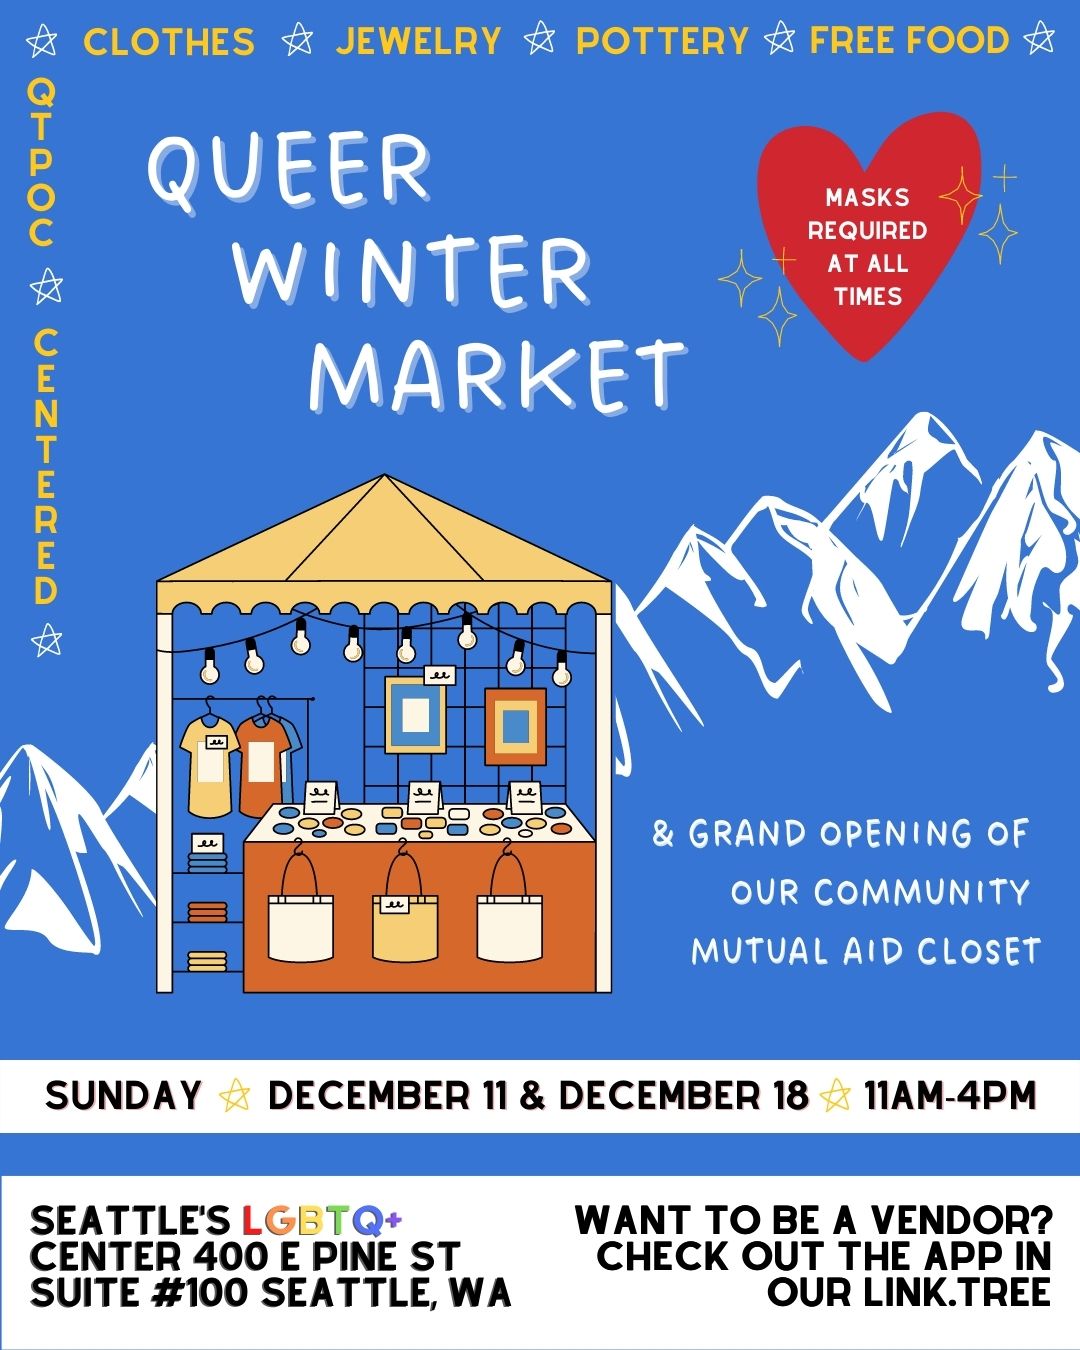 2022 Queer Winter Market event flyer with mountains in the background and a vendor booth in the foreground